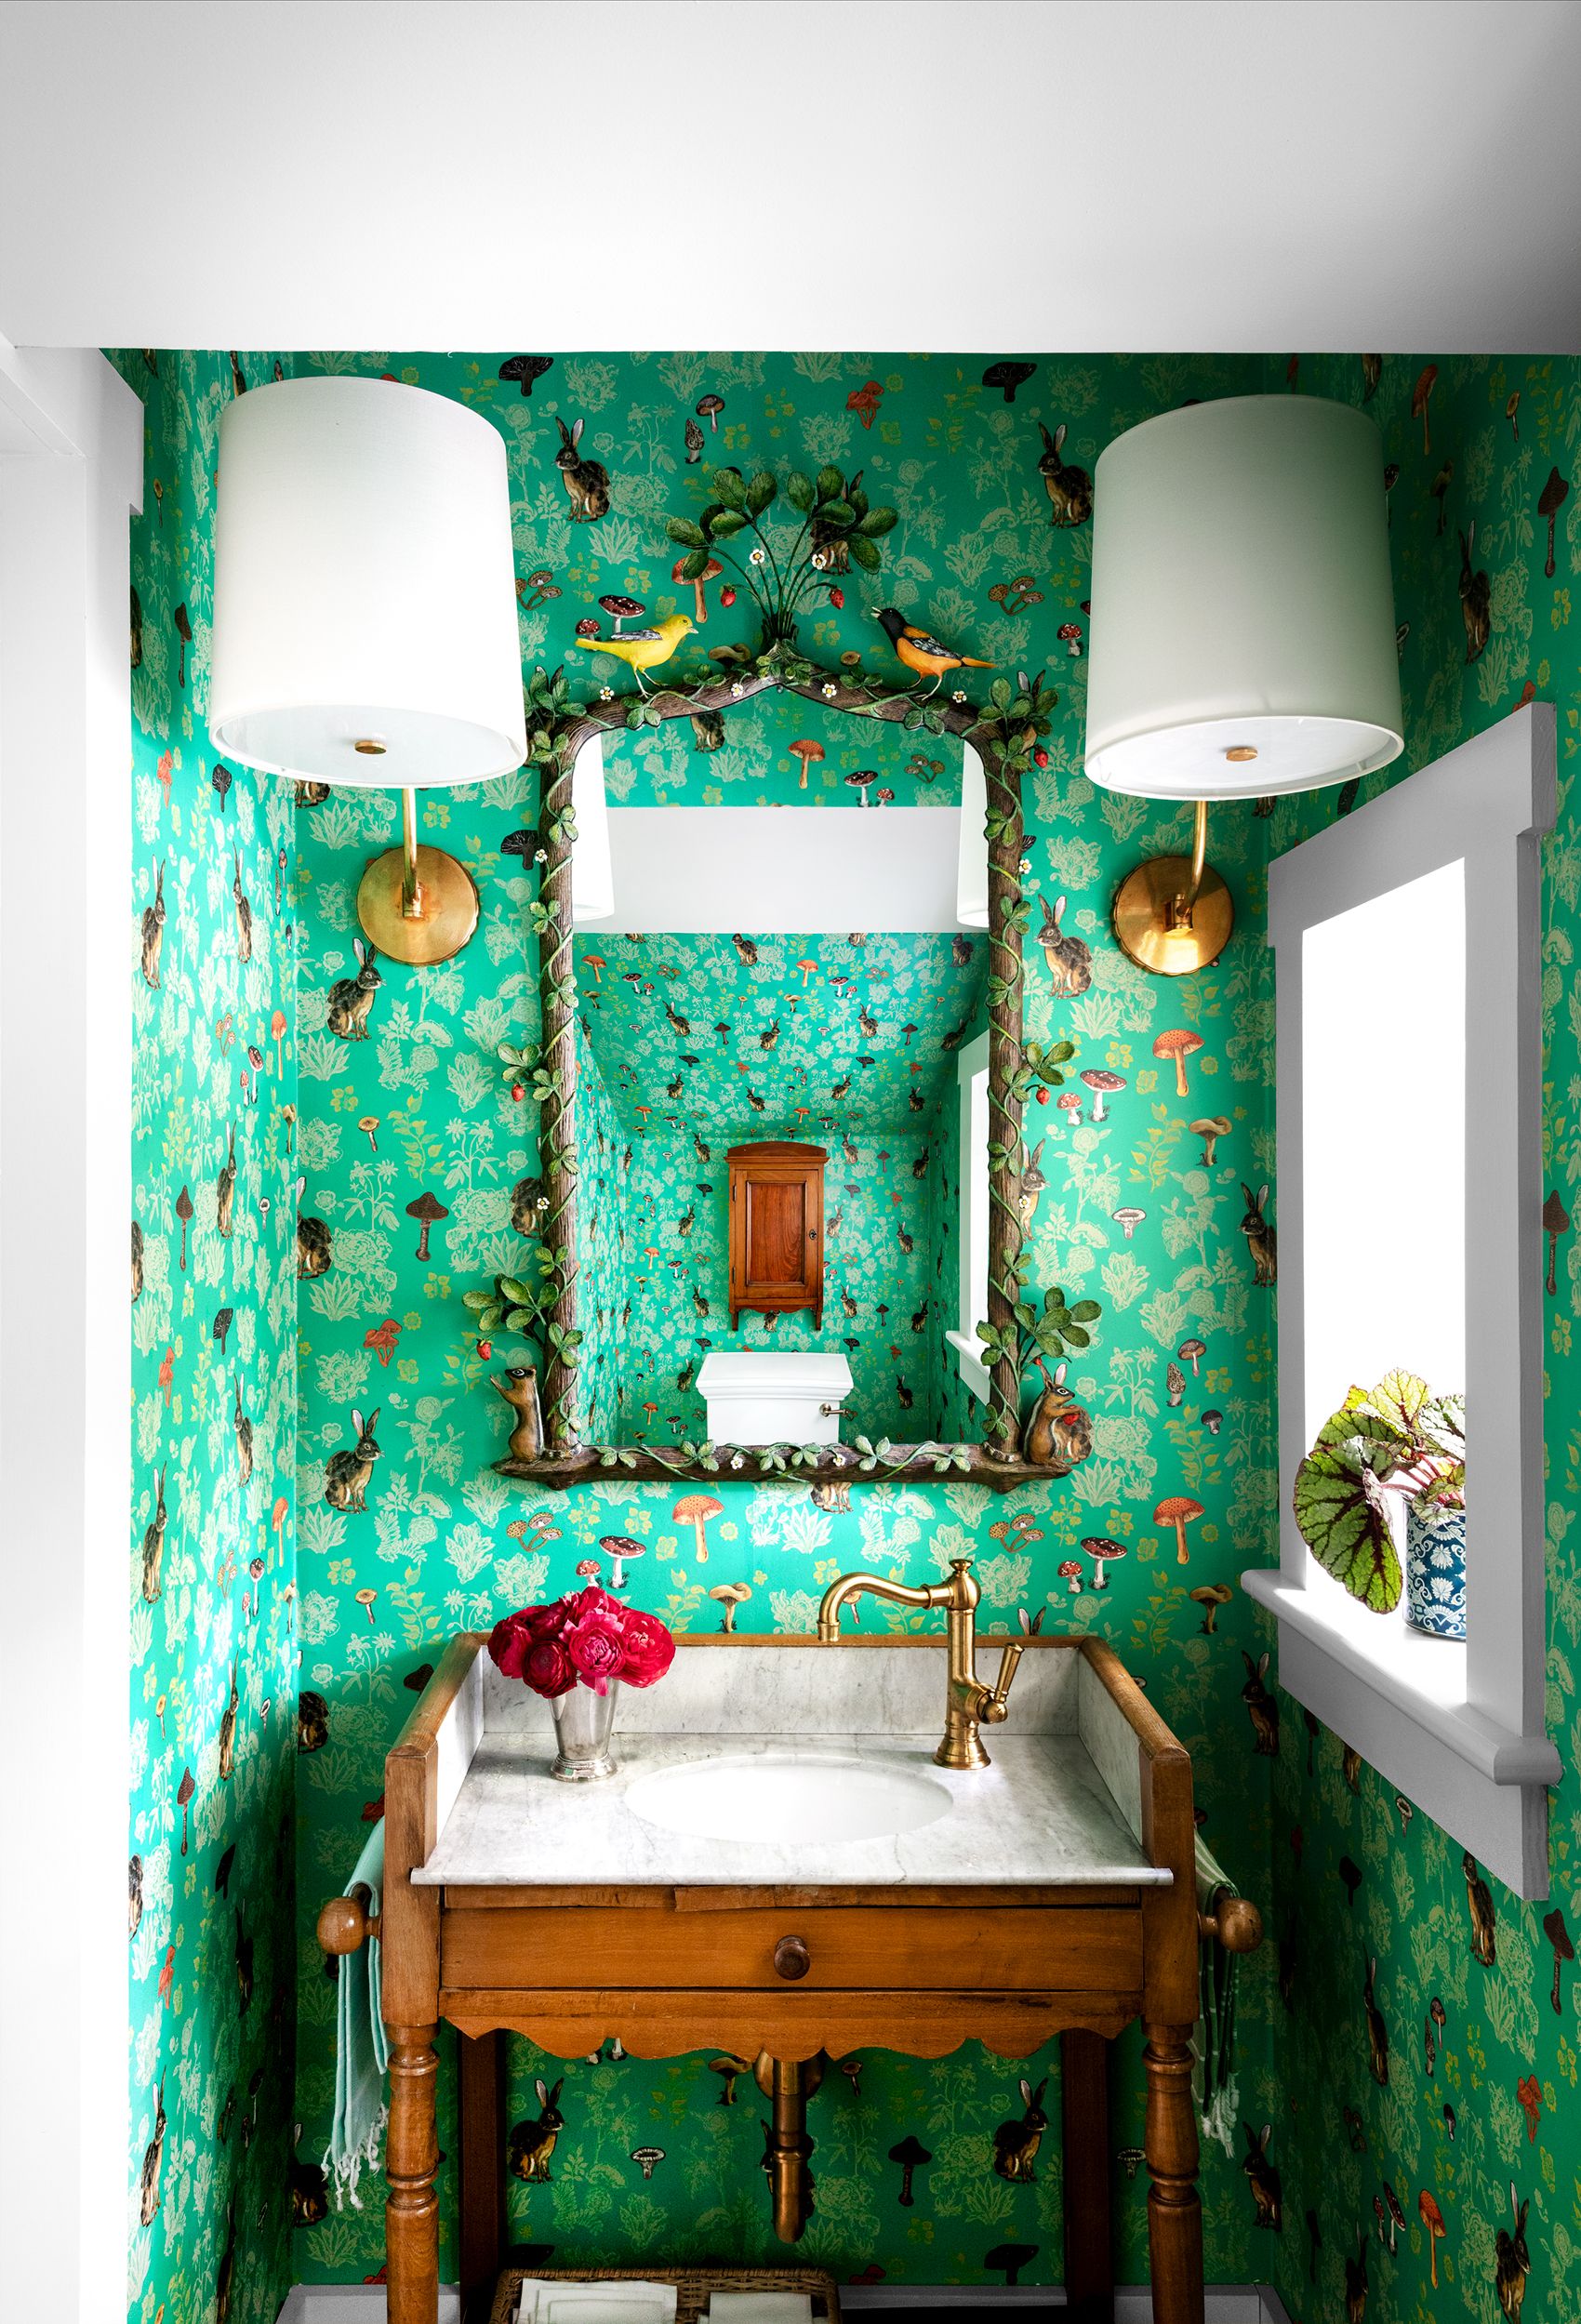 These Whimsical Powder Rooms Are Full of Design Inspiration  Powder room  wallpaper Chic powder room Small toilet room